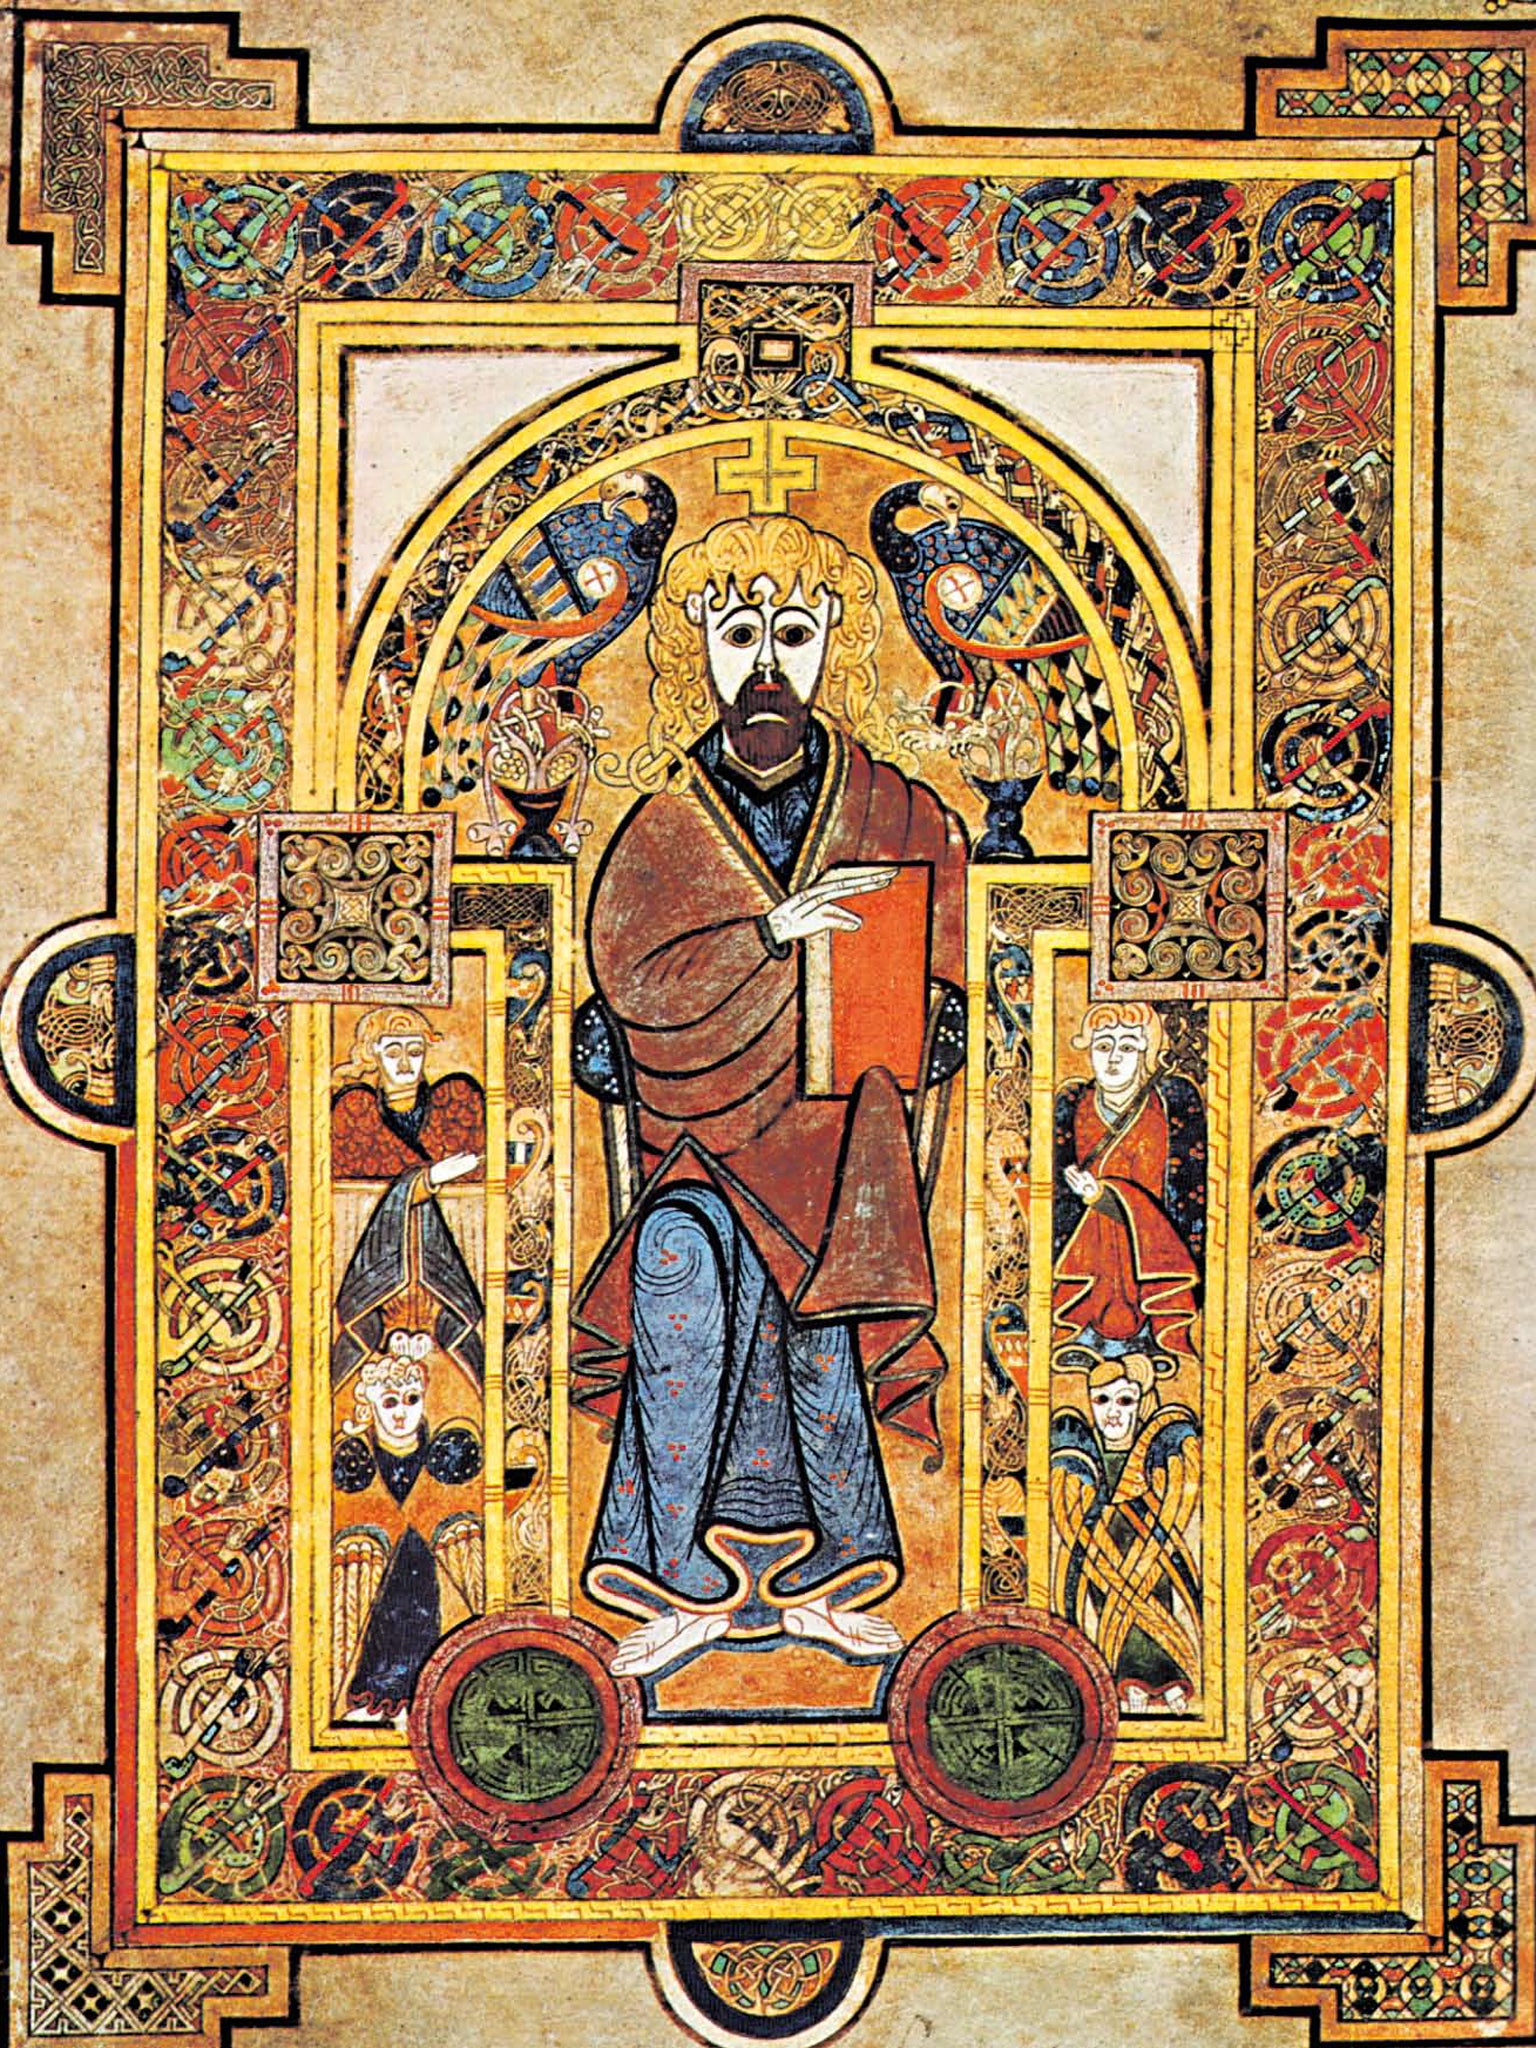 Enigmas of ancient art: Page from the Book of Kells